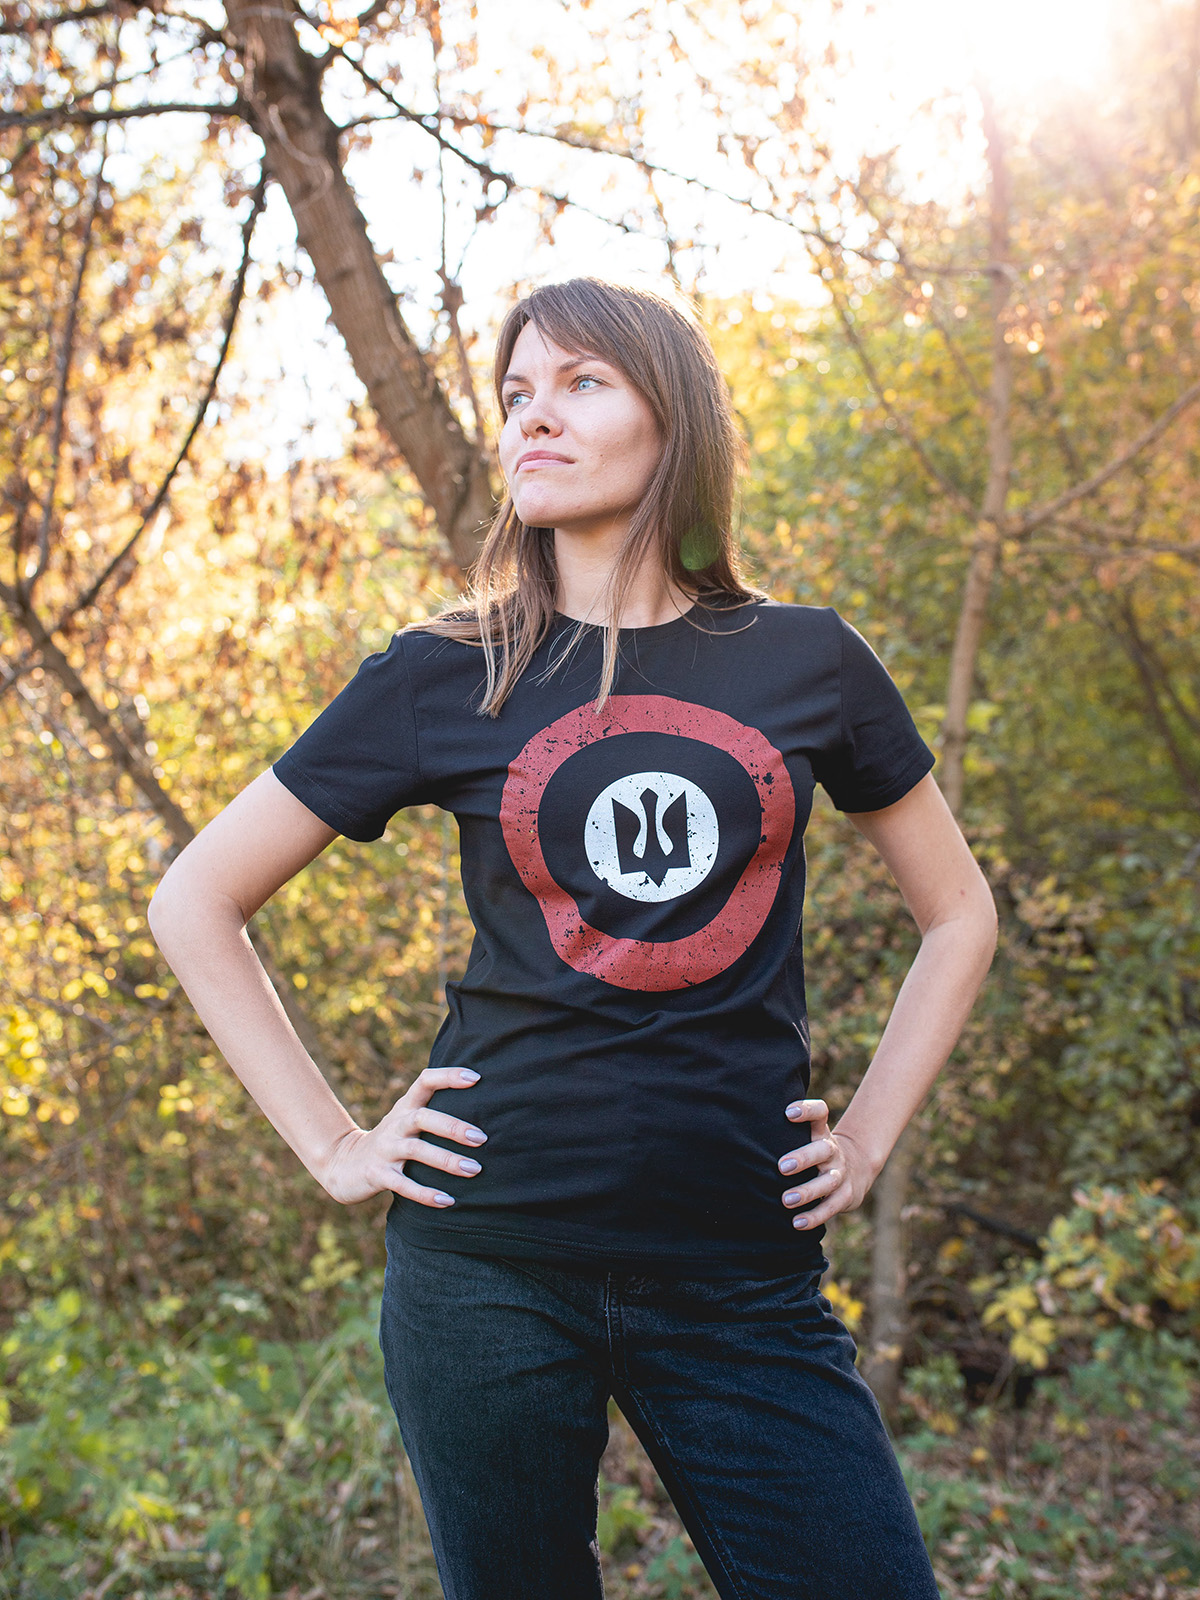 Women's T-Shirt Roundel. Color black.  It looks great on a female figure!
Material: 95% cotton, 5% spandex.